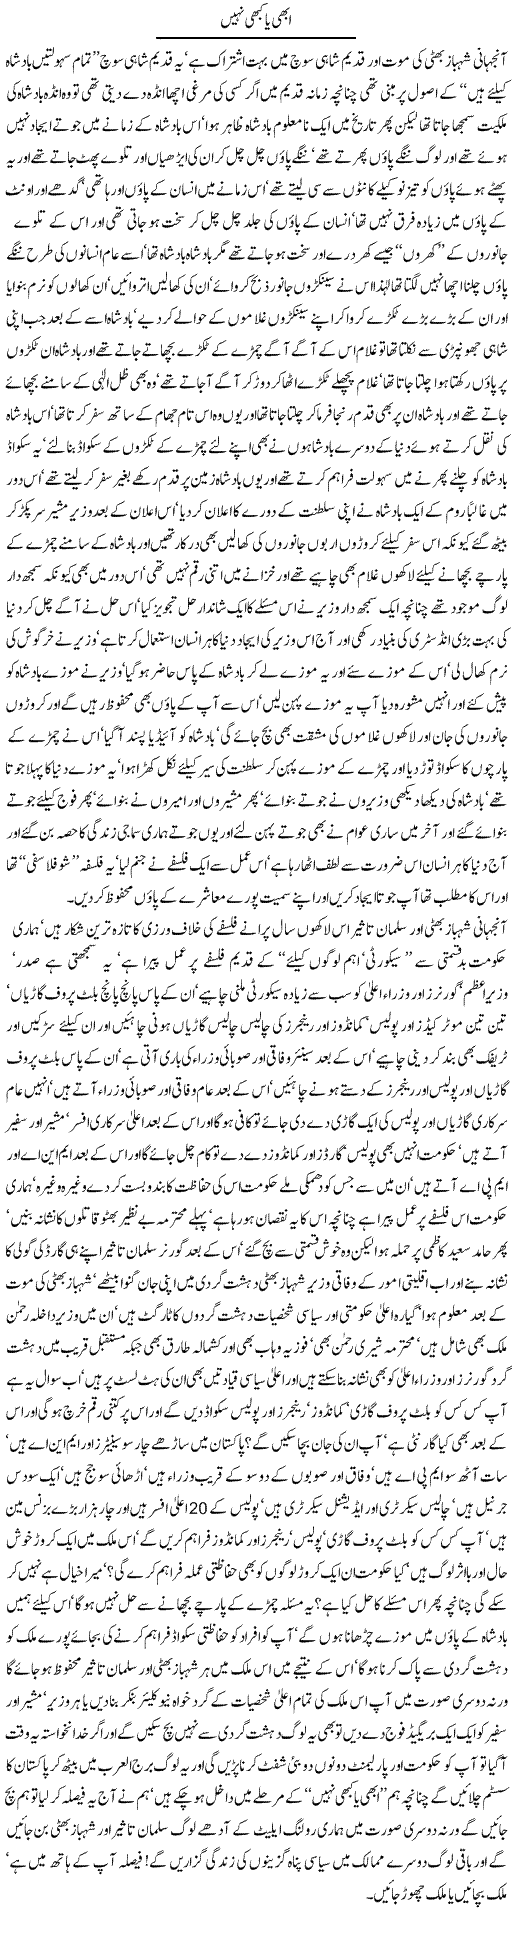 Death of Shahbaz Bhatti Express Column Javed Chaudhry 6 March 2011